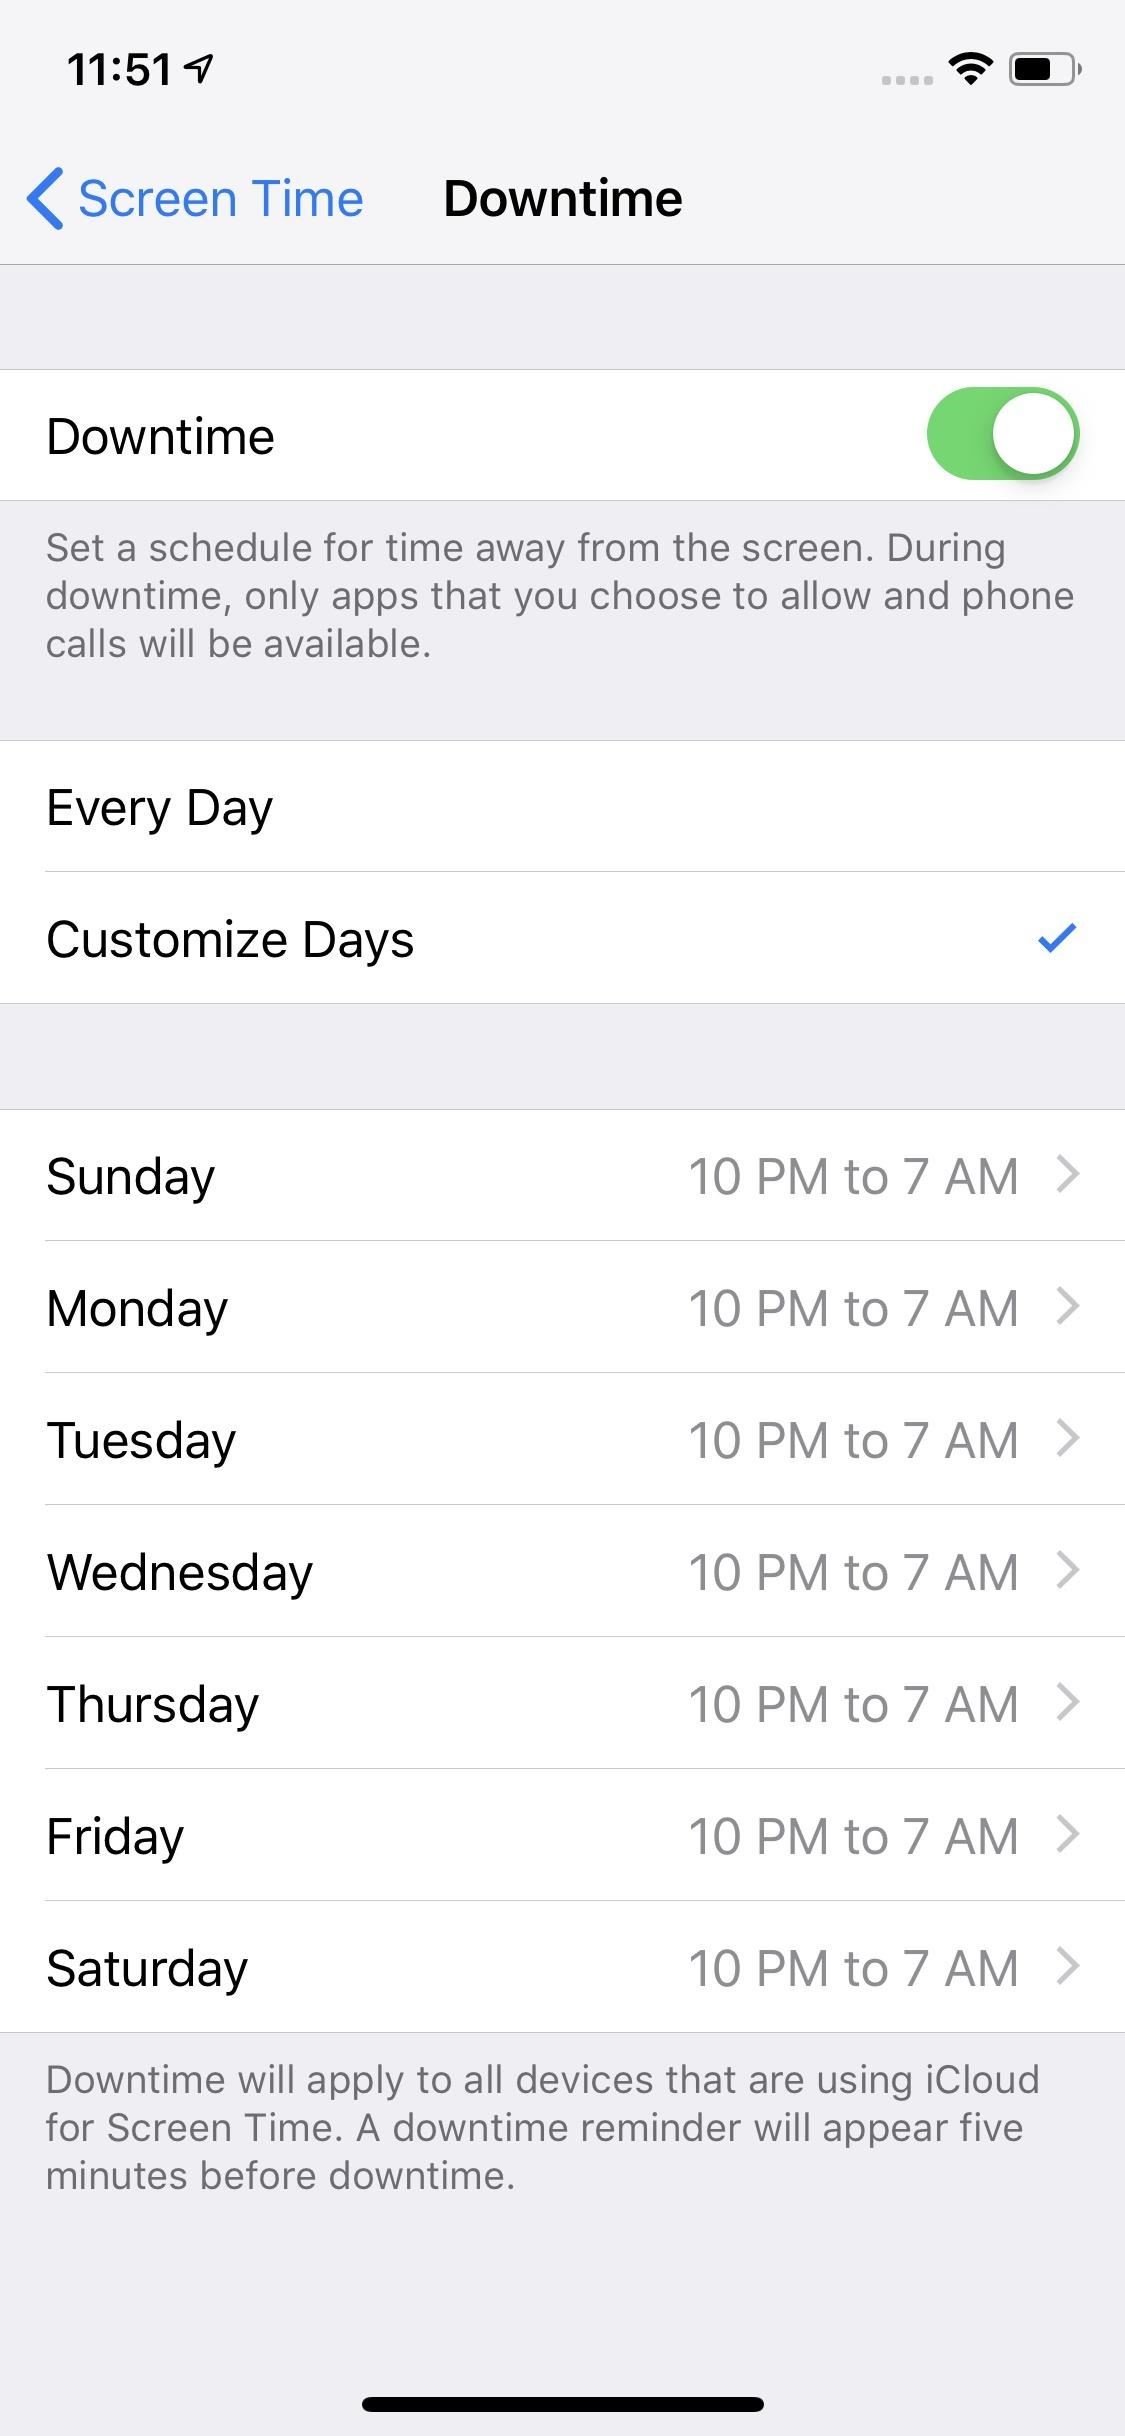 How to Set Different Downtime Schedules on Your iPhone for Each Day of the Week